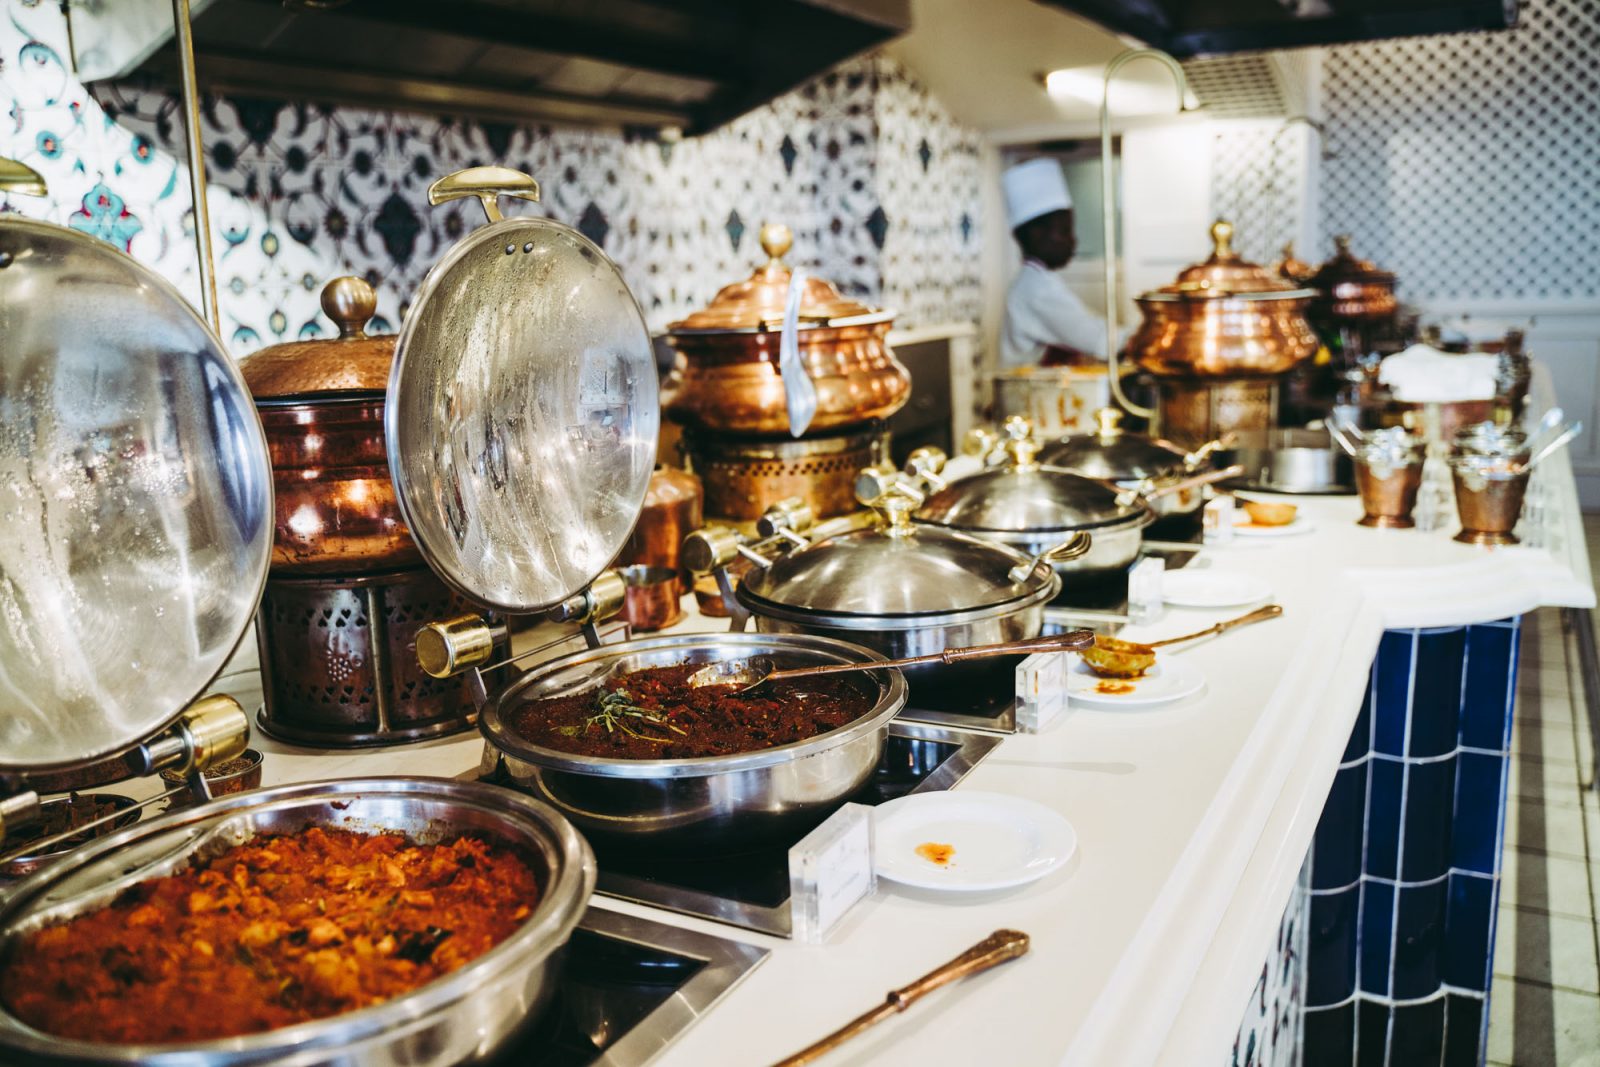 Curry buffet at the Oyster Box hotel in Durban, South Africa